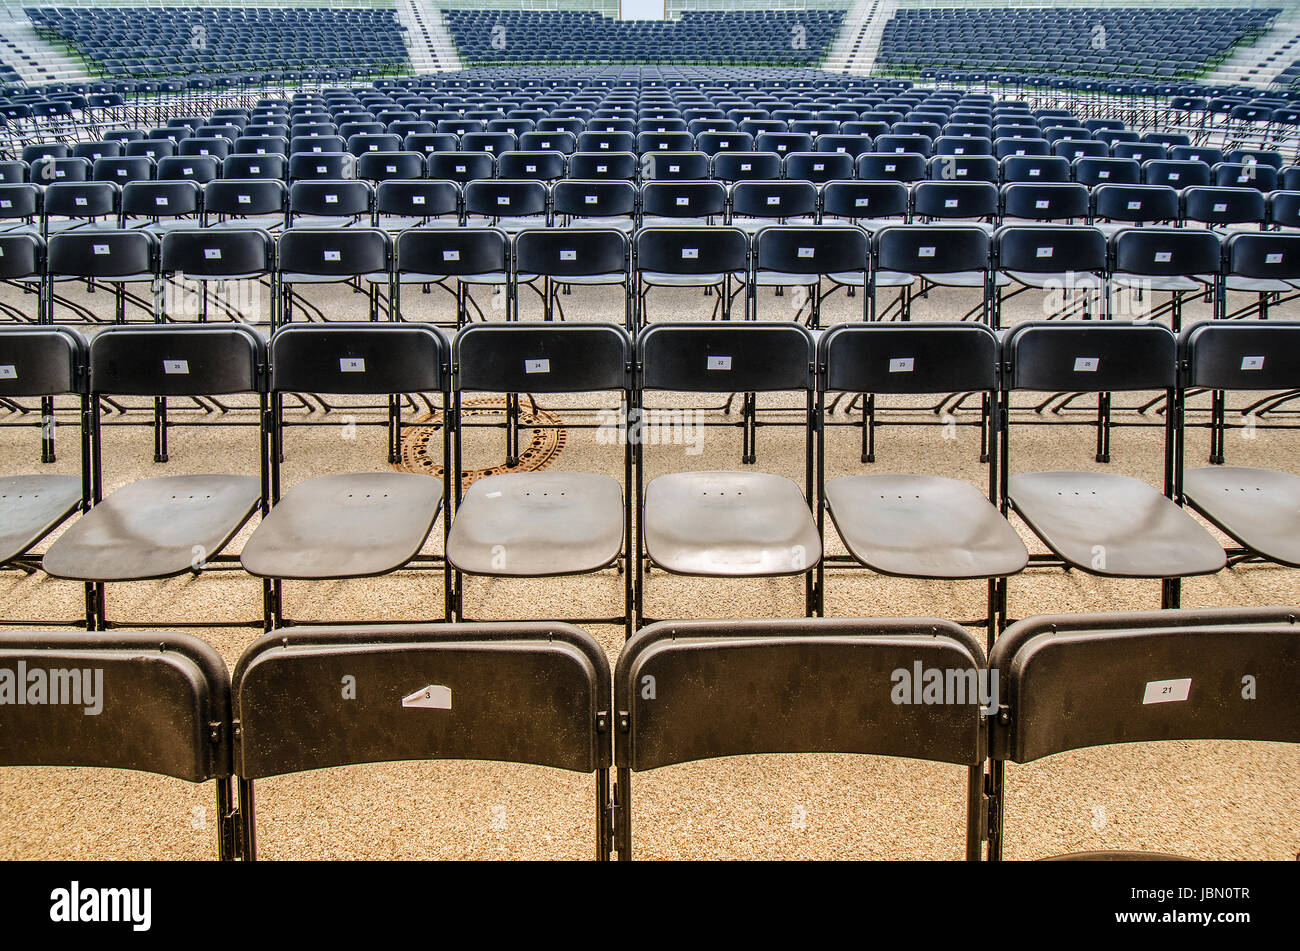 empty seats in many rows in a concert arena Stock Photo